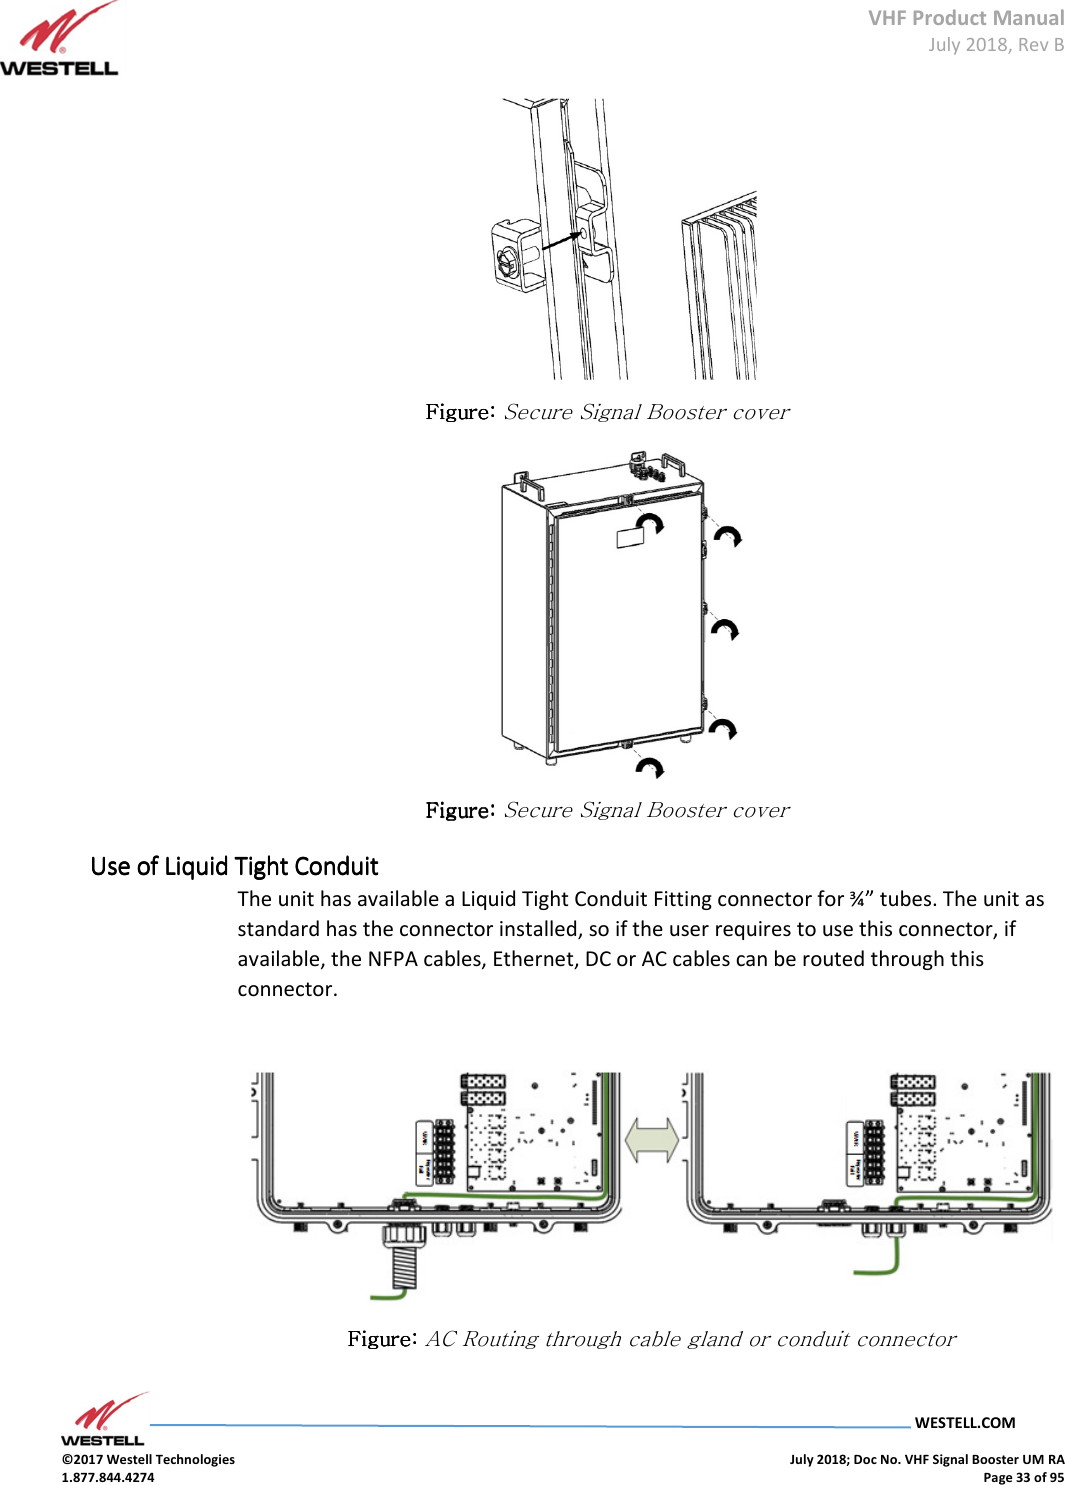 VHF Product Manual July 2018, Rev B   WESTELL.COM  ©2017 Westell Technologies    July 2018; Doc No. VHF Signal Booster UM RA 1.877.844.4274    Page 33 of 95   Figure: Figure: Figure: Figure: Secure Signal Booster cover  Figure: Figure: Figure: Figure: Secure Signal Booster cover Use of Liquid Tight ConduitUse of Liquid Tight ConduitUse of Liquid Tight ConduitUse of Liquid Tight Conduit    The unit has available a Liquid Tight Conduit Fitting connector for ¾” tubes. The unit as standard has the connector installed, so if the user requires to use this connector, if available, the NFPA cables, Ethernet, DC or AC cables can be routed through this connector.   Figure: Figure: Figure: Figure: AC Routing through cable gland or conduit connector  